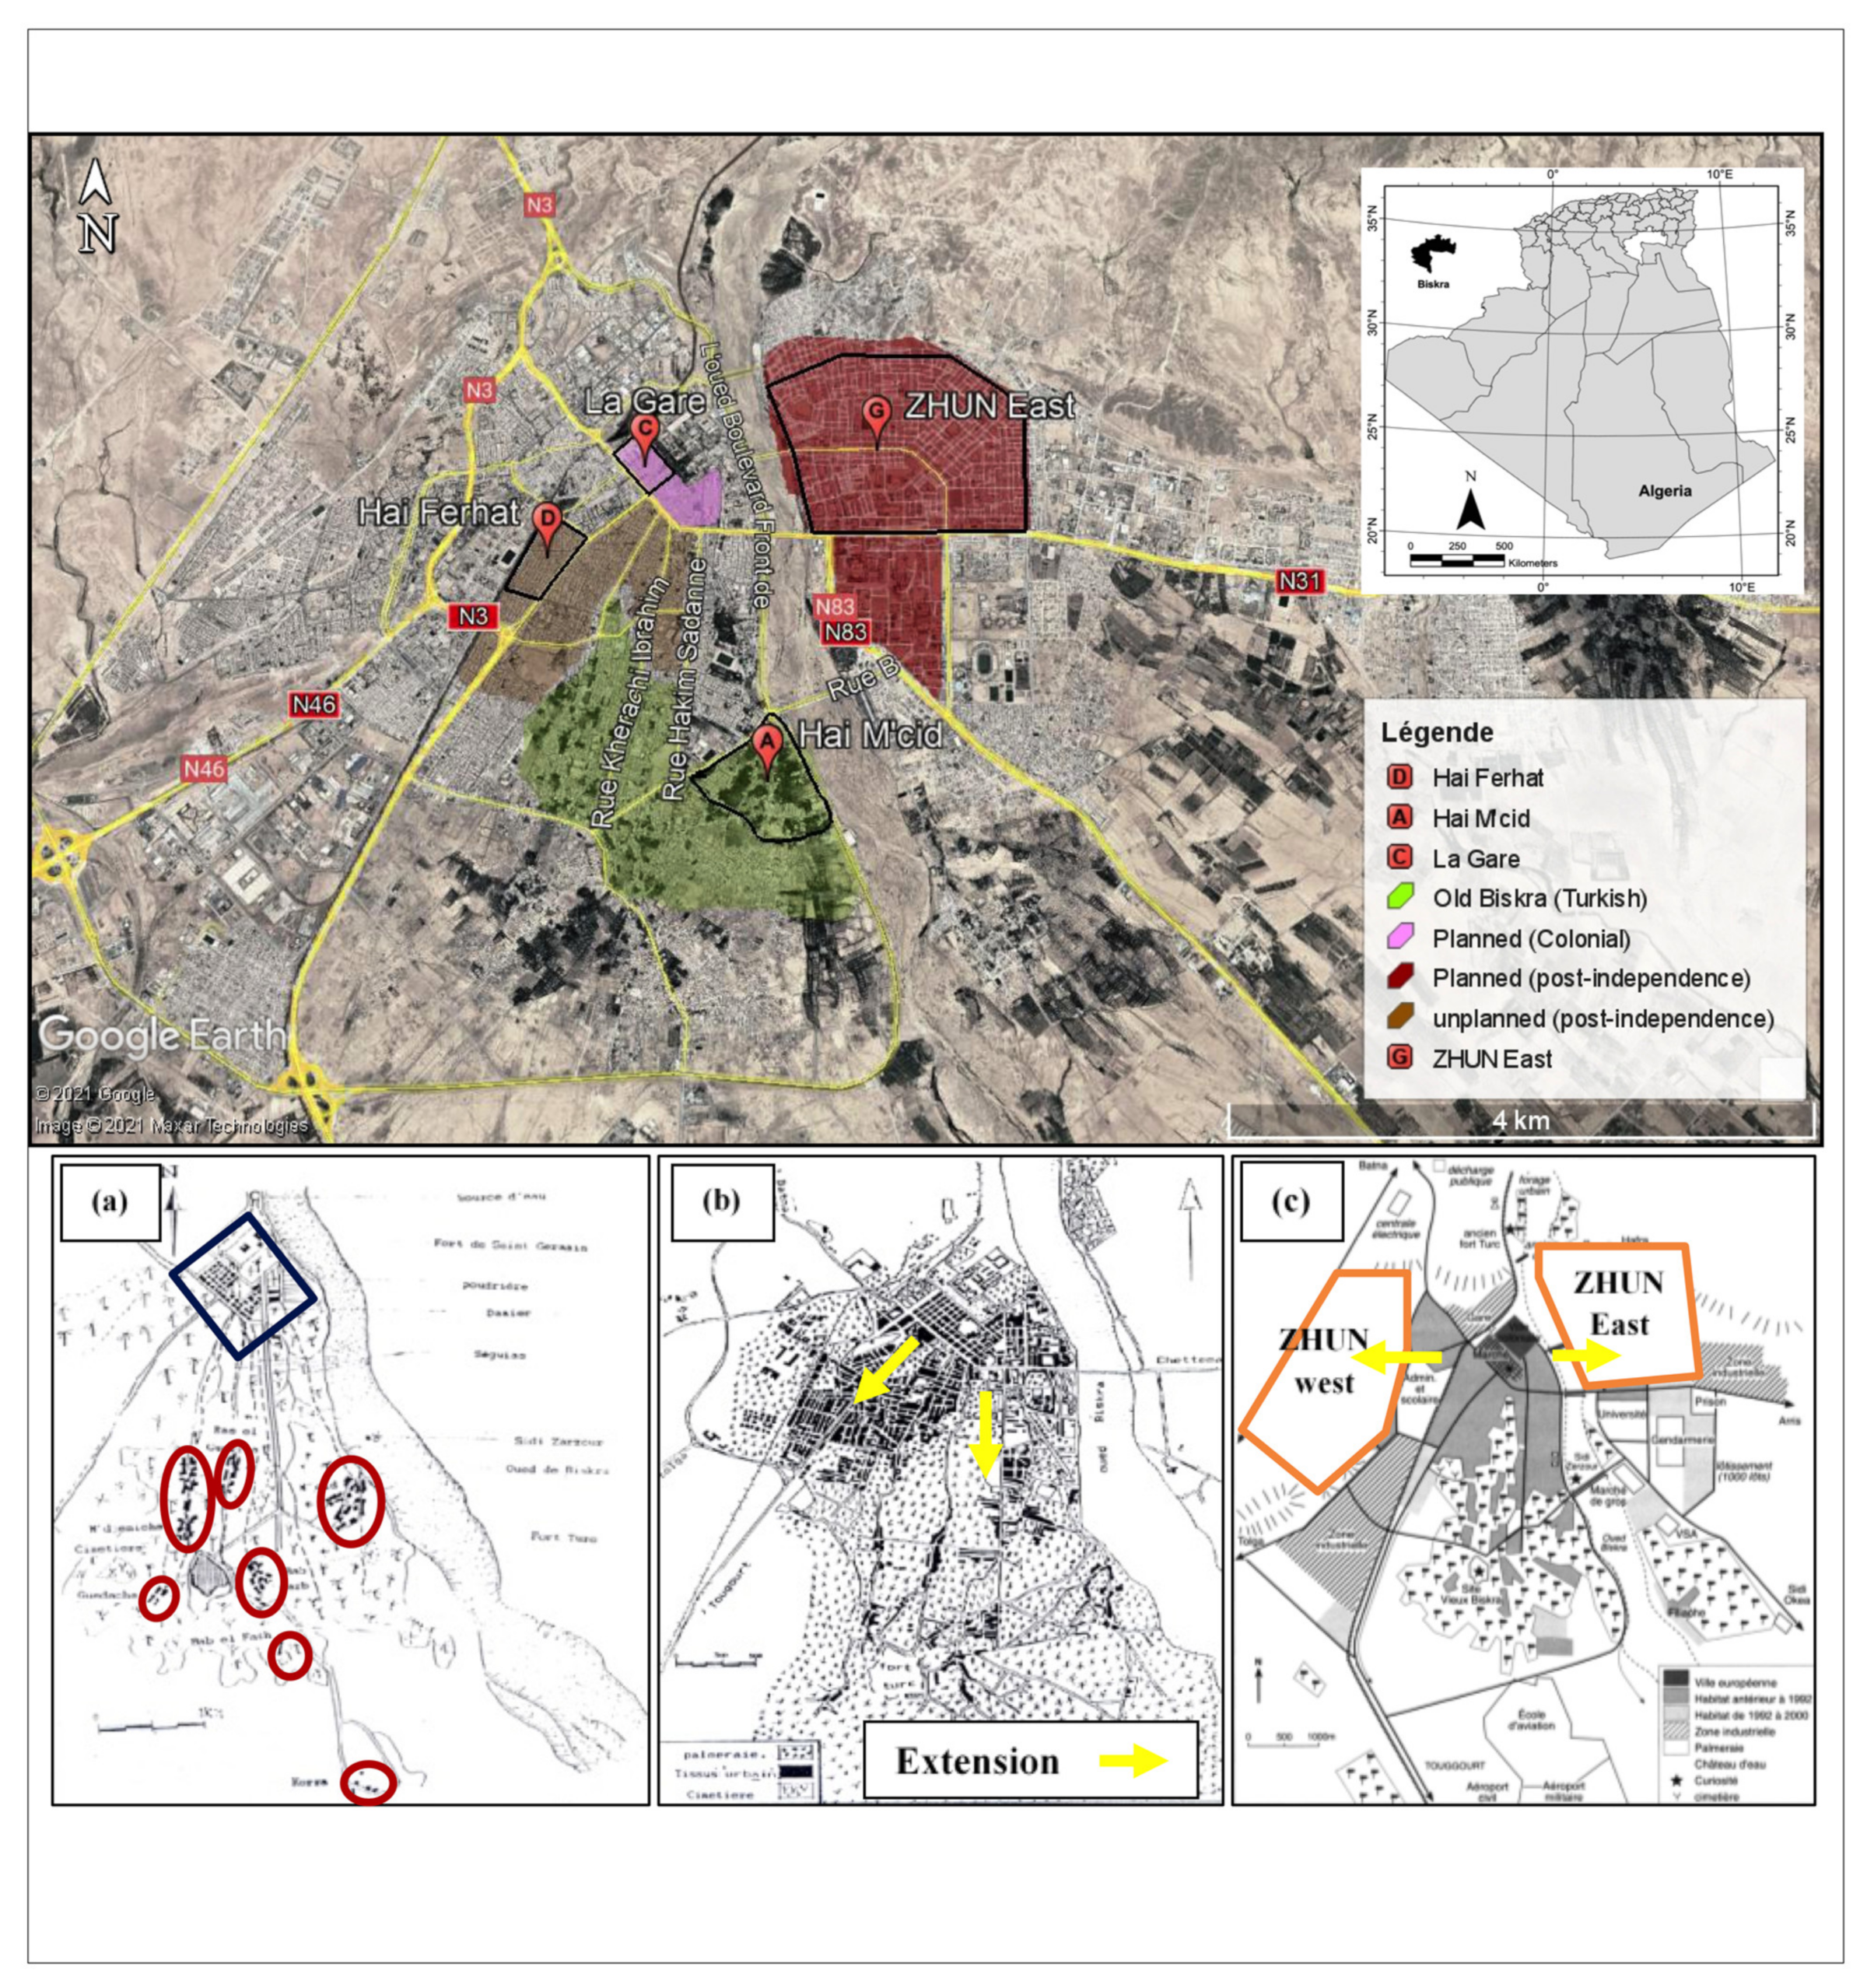 Sustainability | Free Full-Text | Noise and Spatial Configuration in  Biskra, Algeria—A Space Syntax Approach to Understand the Built Environment  for Visually Impaired People